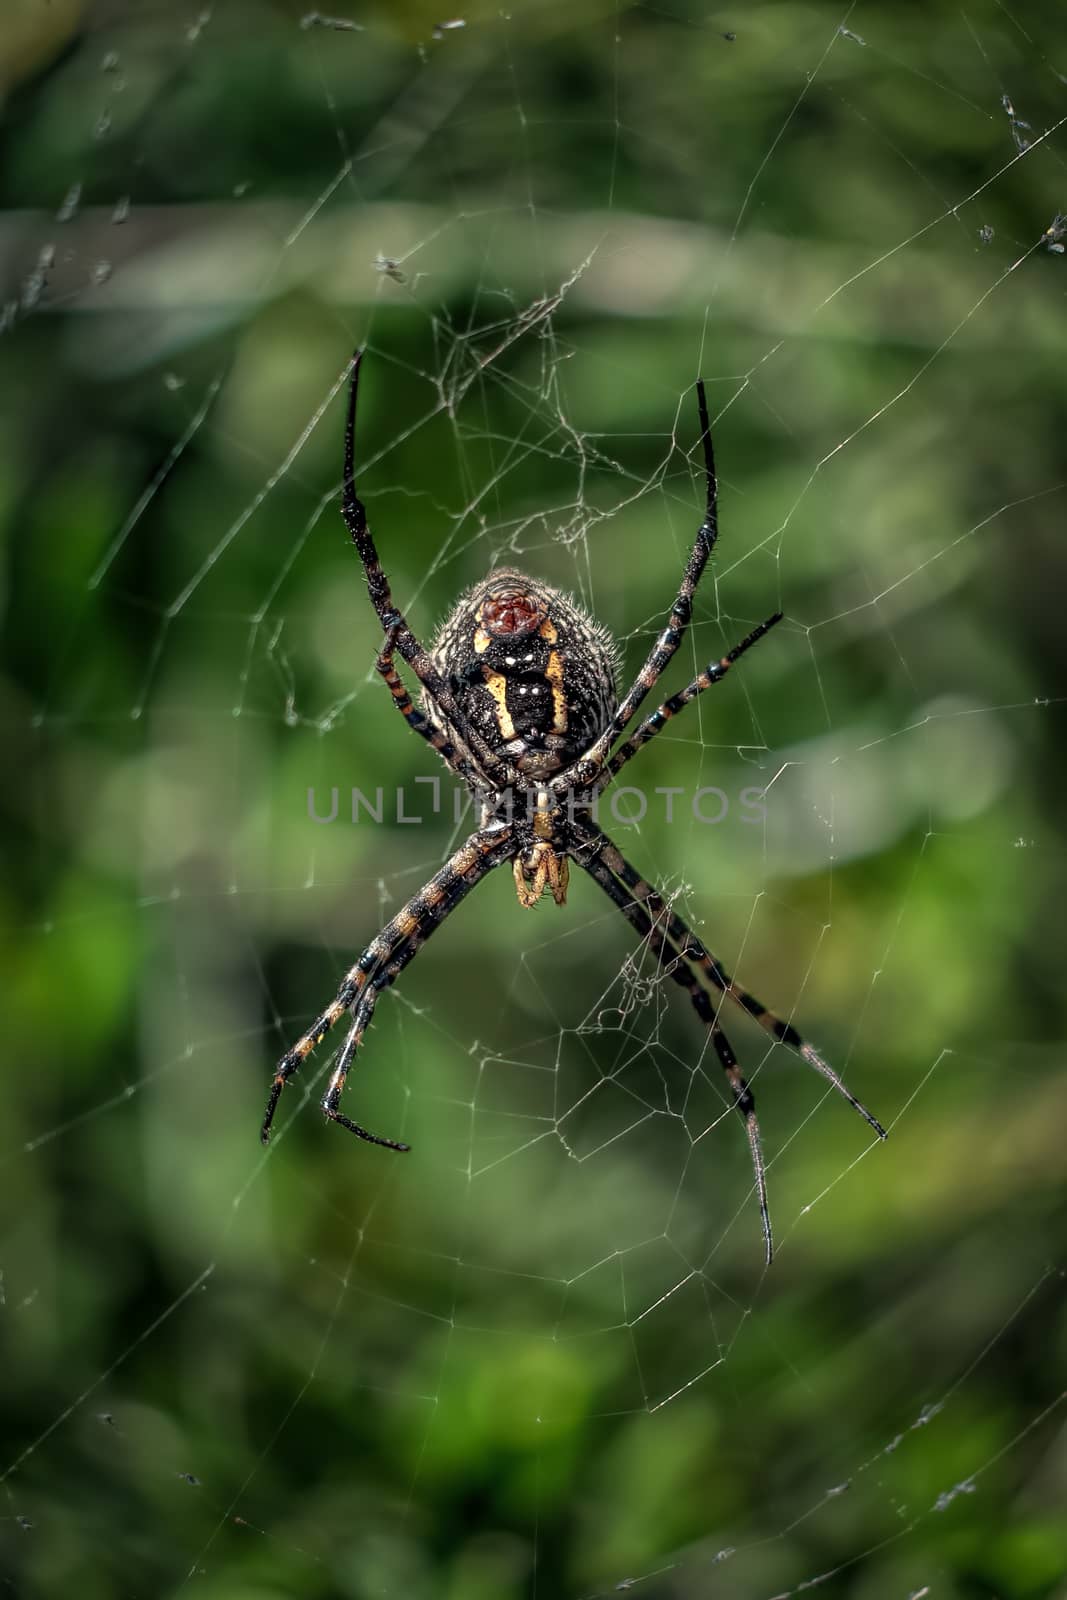 Black and Yellow Araneus Spider in her web.Araneus is a genus of common orb-weaving spiders. It includes about 650 species, among which are the European garden spider and the barn spider.